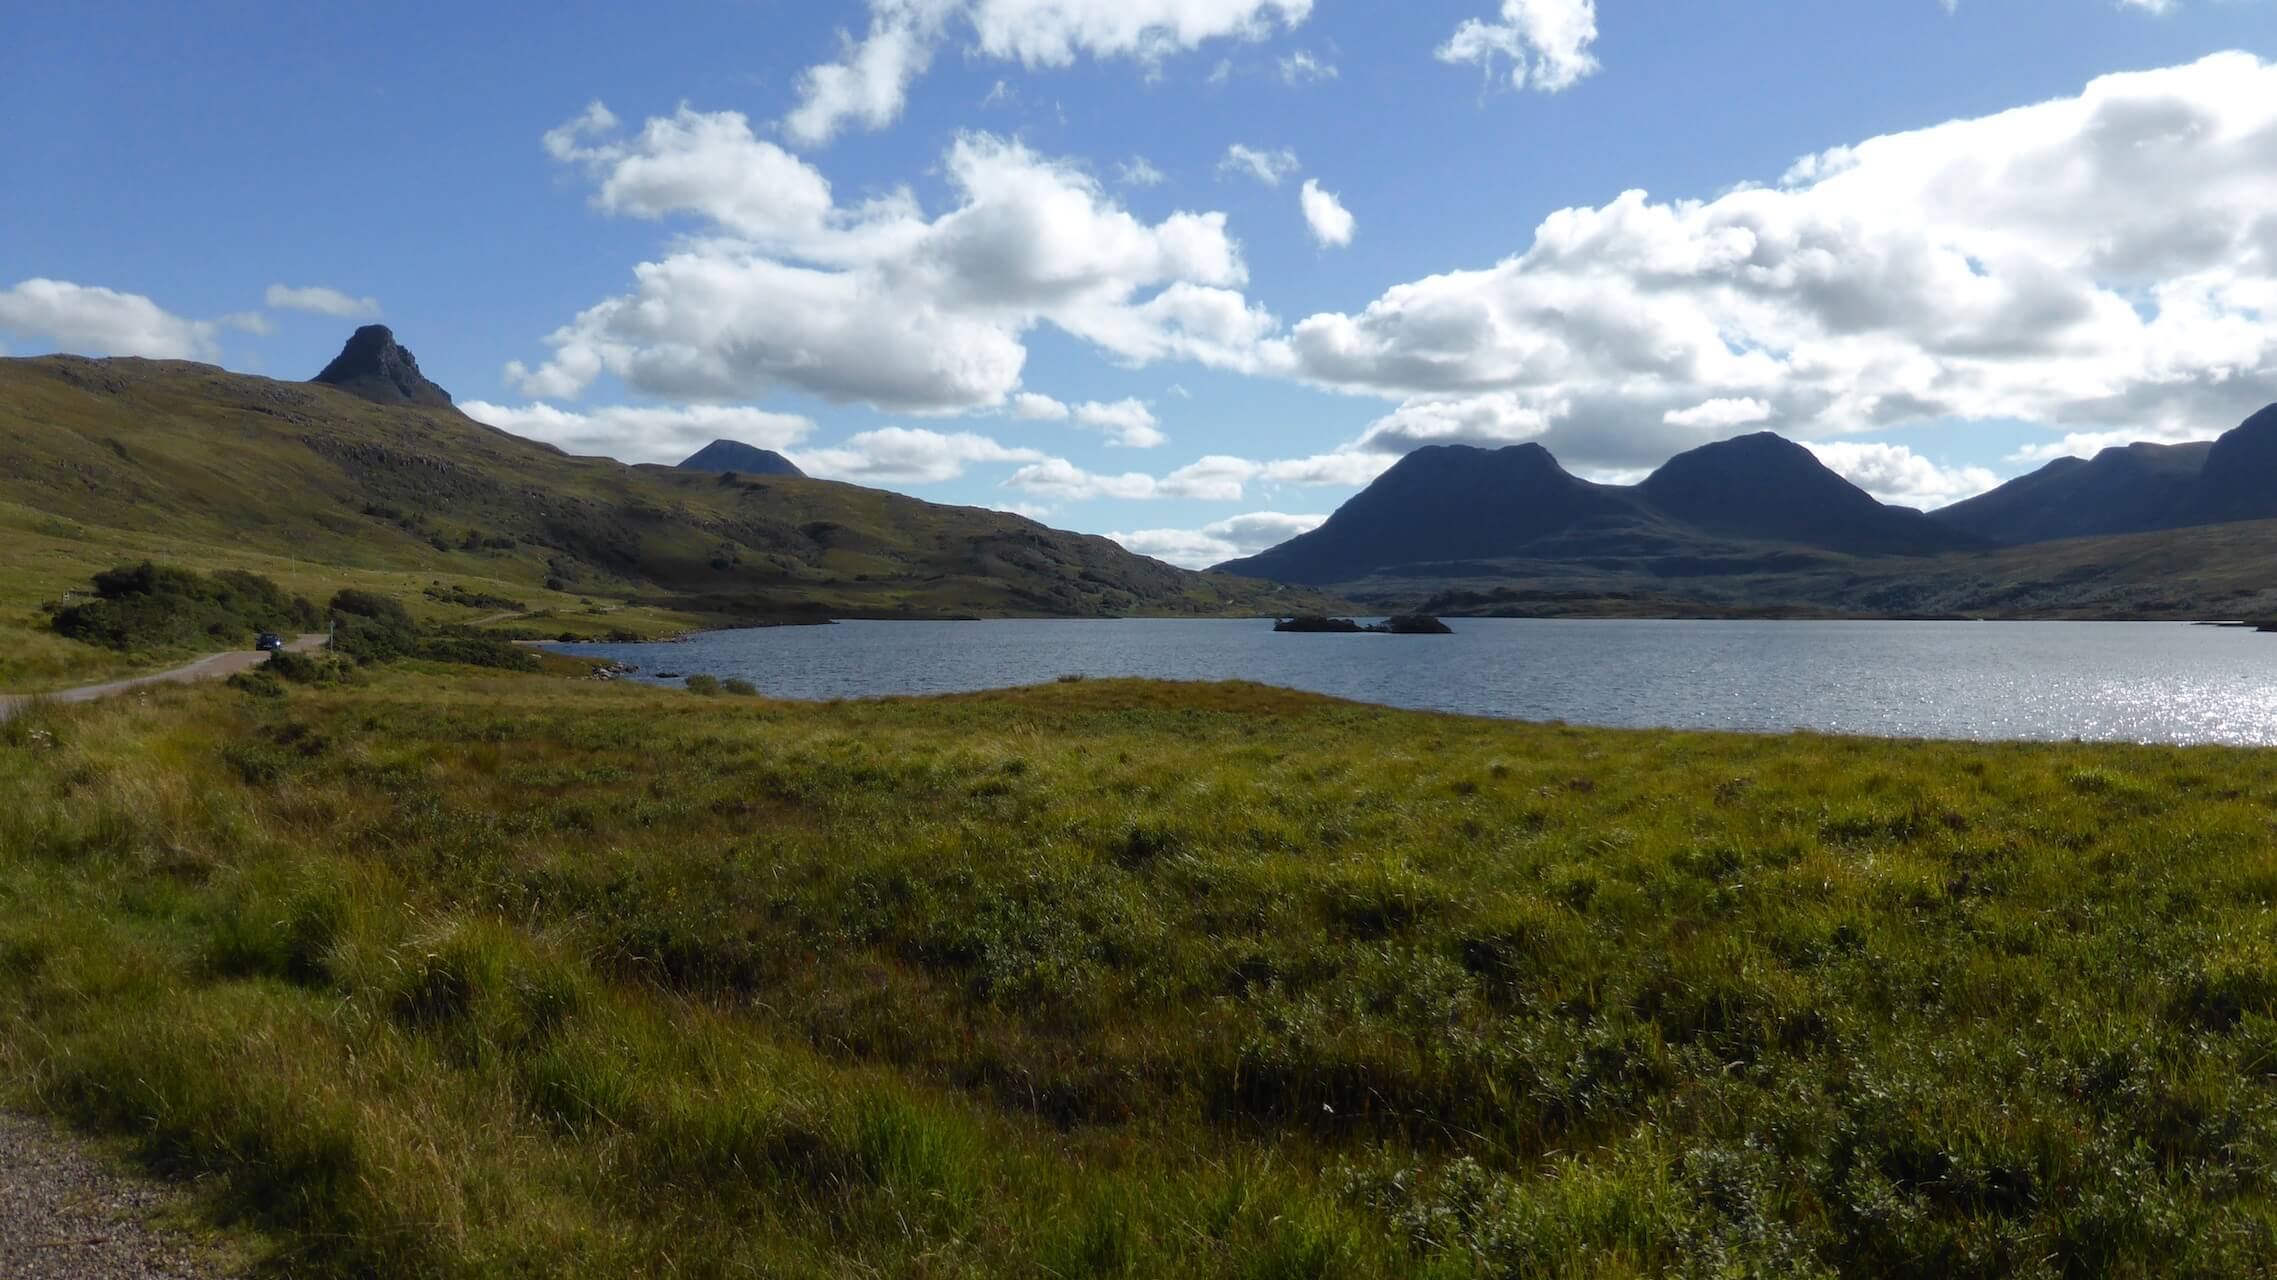 Loch Bad a' Ghaill with a backdrop of Stac Pollaidh and Cùl Beag